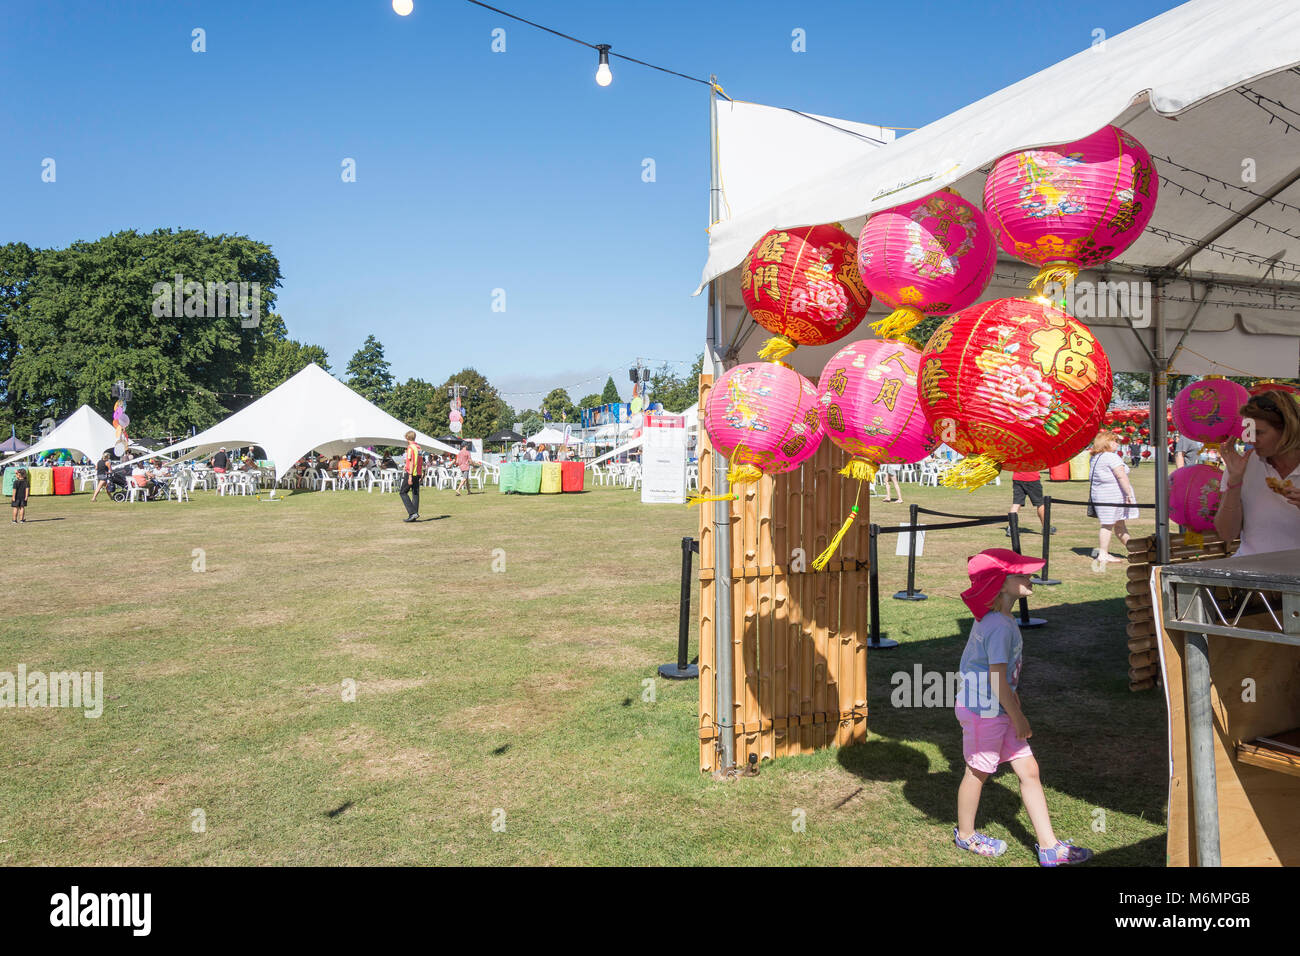 'Noodle night markets' event in North Hagley Park, Christchurch, Canterbury, New Zealand Stock Photo